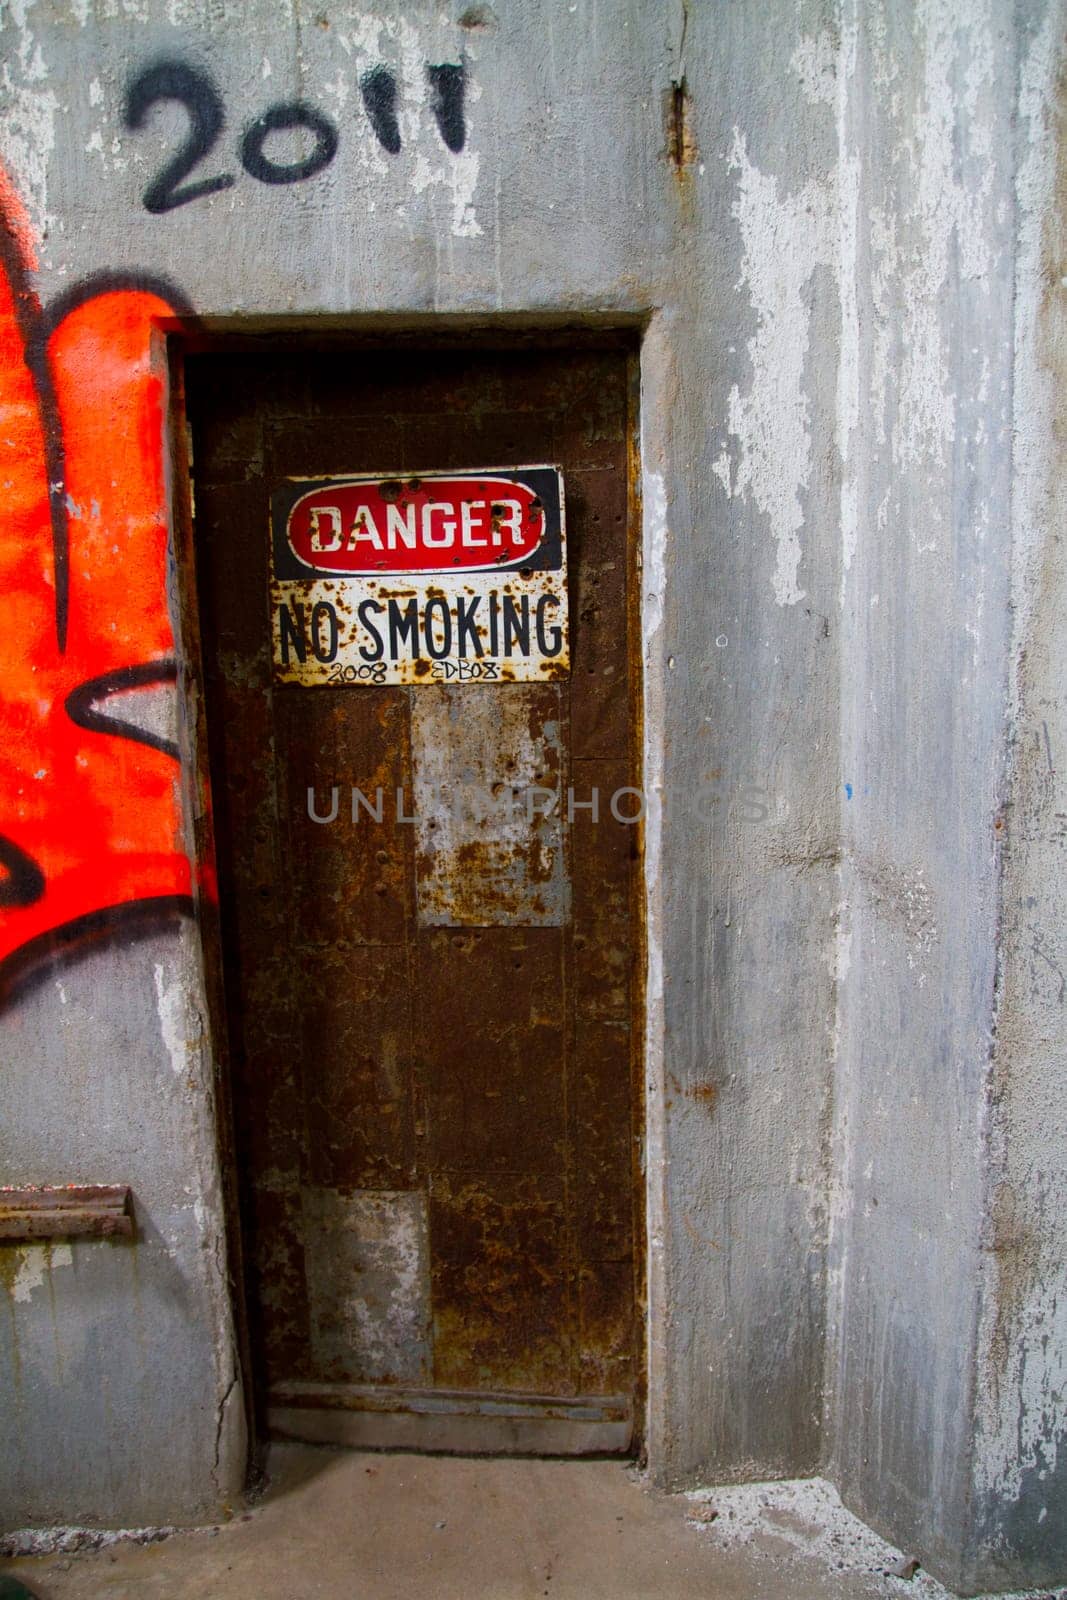 Decaying industrial doorway in East of St. Louis, Illinois. Rusty metal door adorned with weathered 'DANGER NO SMOKING' sign hints at hazardous conditions. Urban decay and cautionary themes.